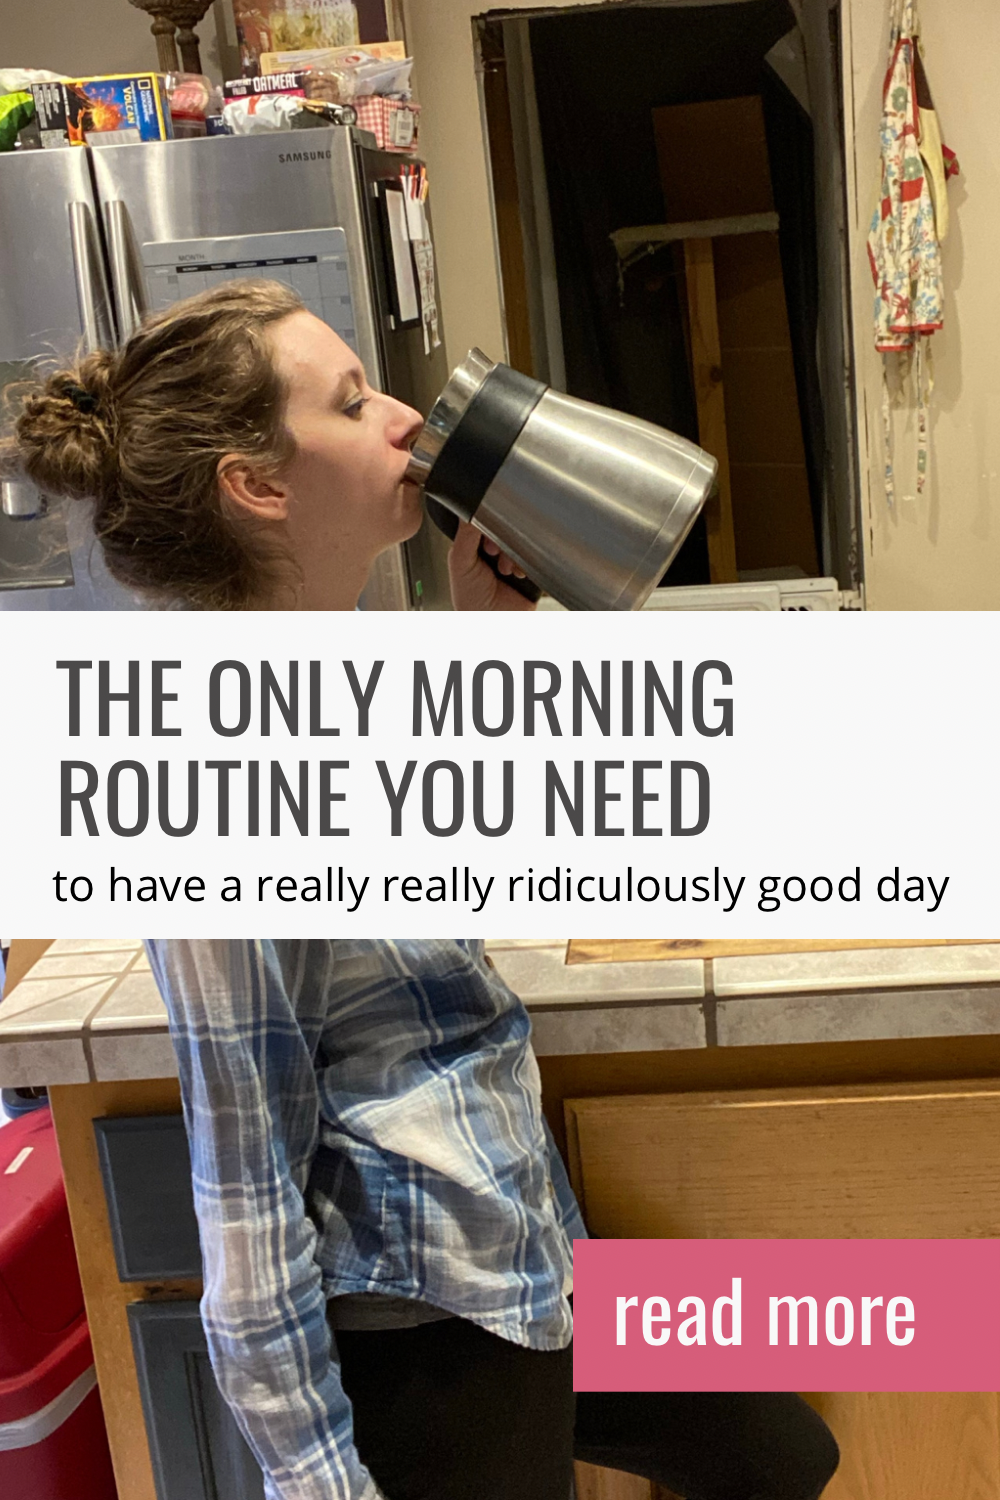 19: The Only Morning Routine You Need to Have a Really Really Ridiculously Good Day